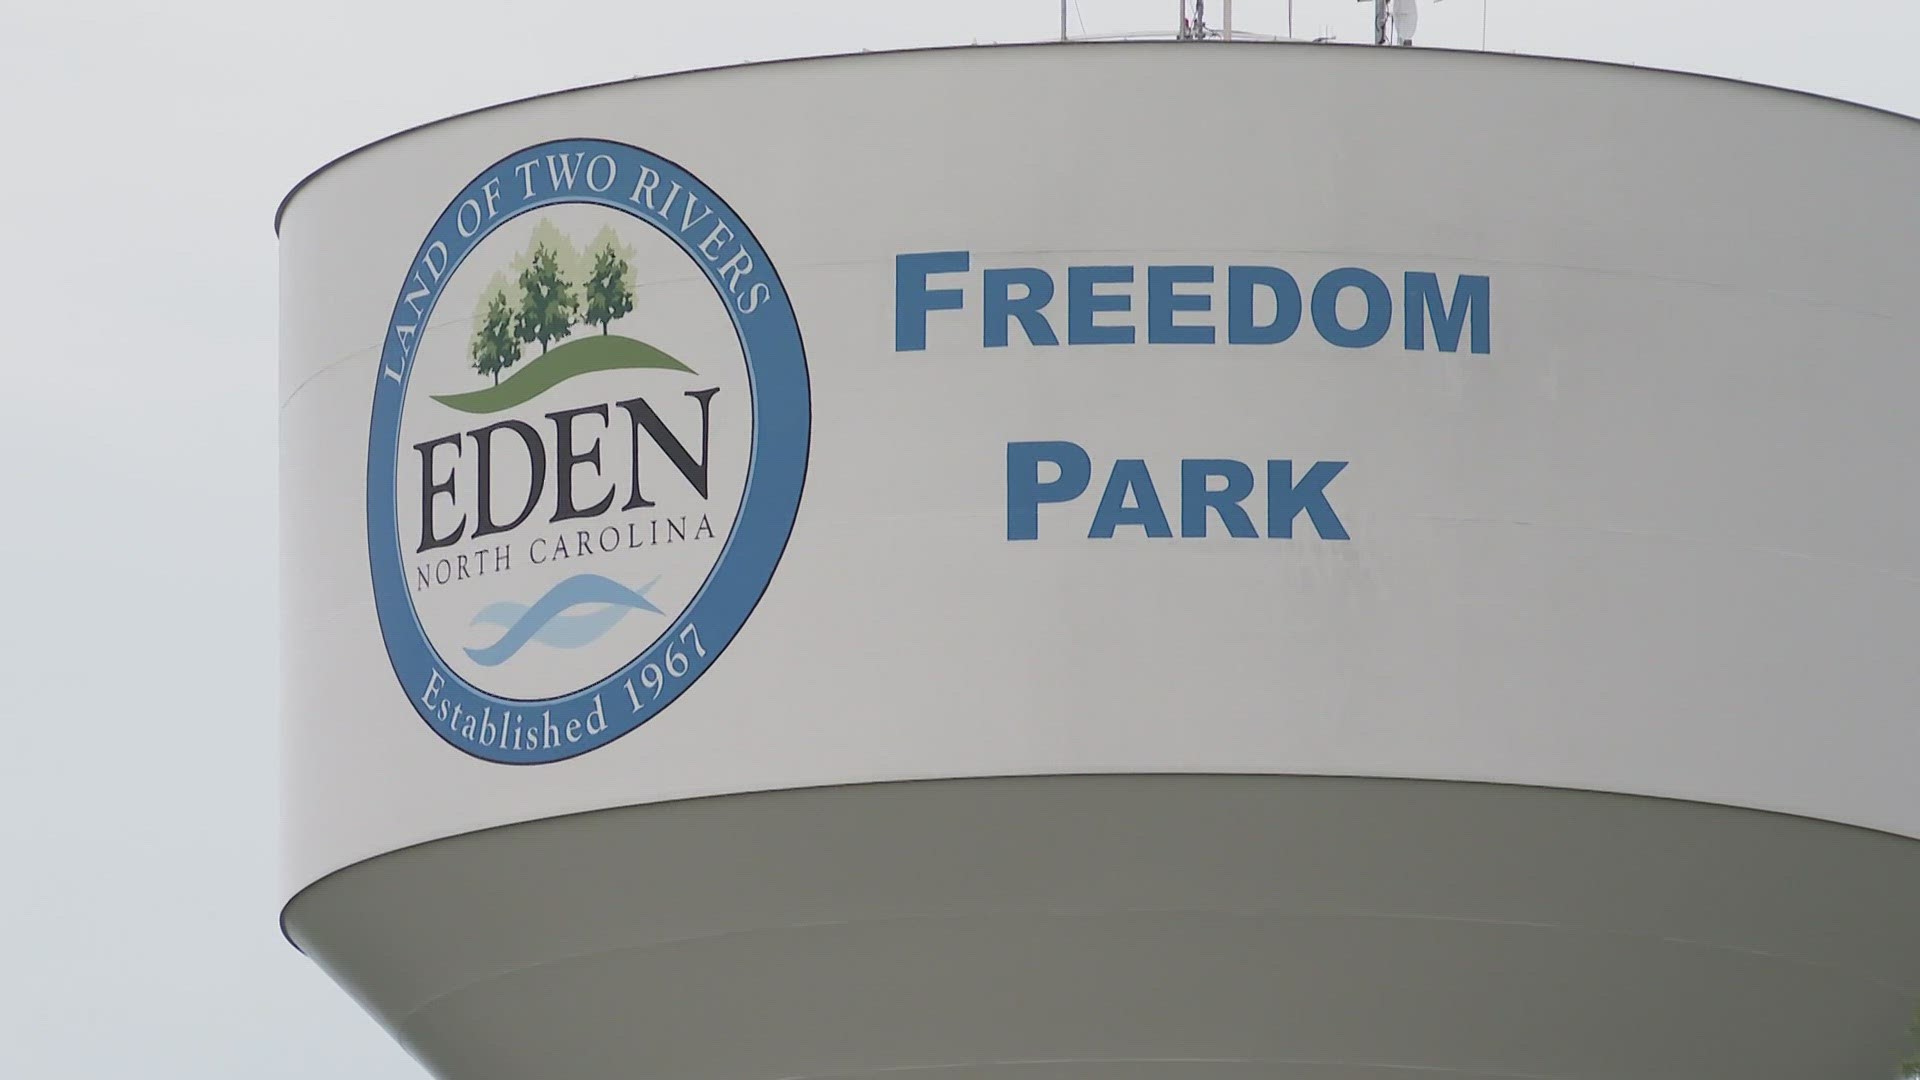 Eden police say John Powell murdered someone in the parking lot of Freedom Park